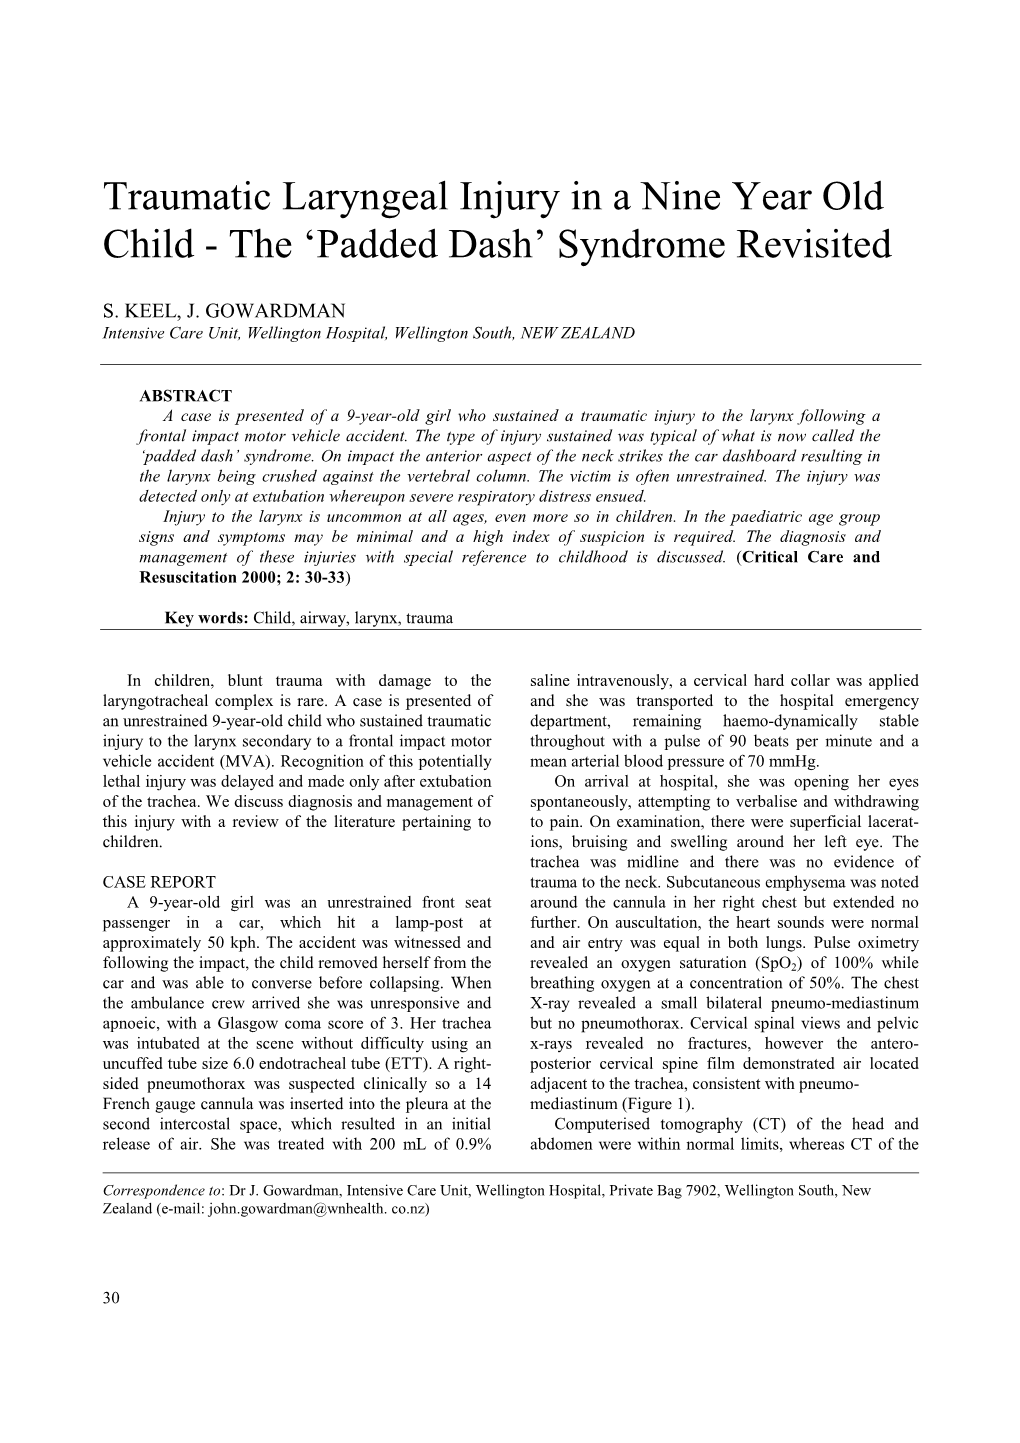 Traumatic Laryngeal Injury in a Nine Year Old Child - the ‘Padded Dash’ Syndrome Revisited